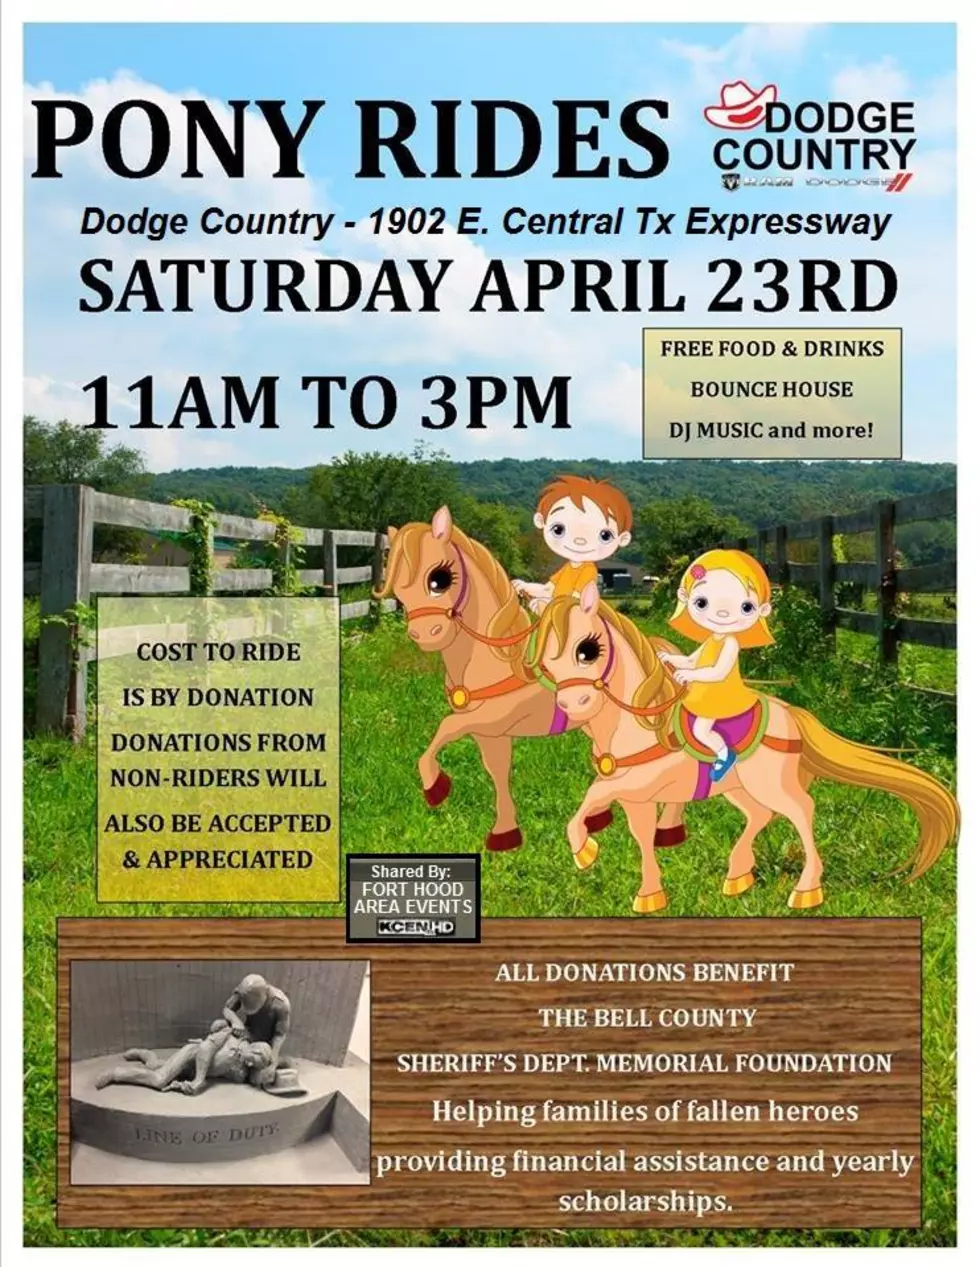 Pony Rides to Benefit Bell County Sheriff’s Memorial Fund